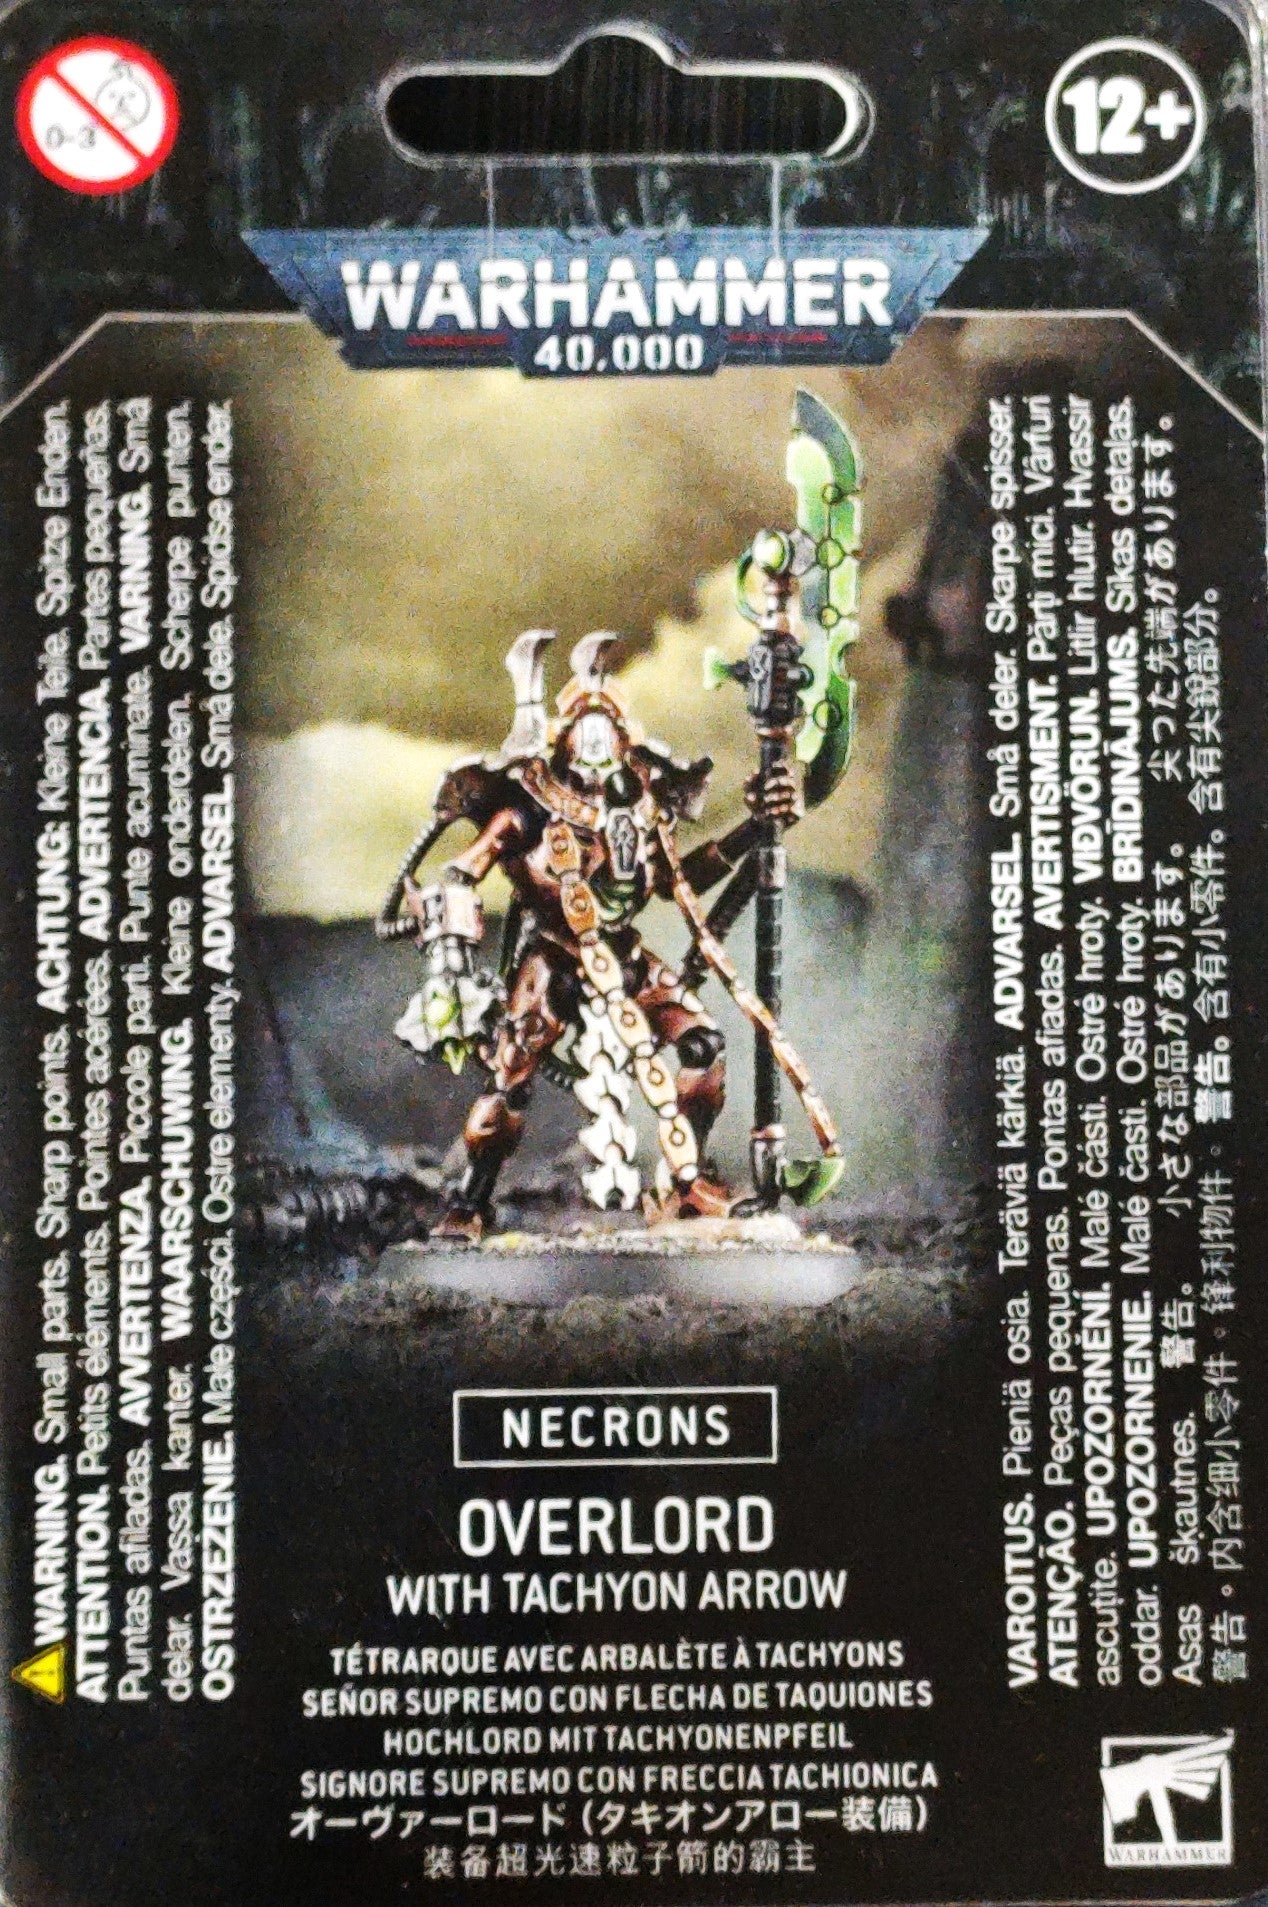 Overlord with Tachyon Arrow Necrons Warhammer 40K WBGames